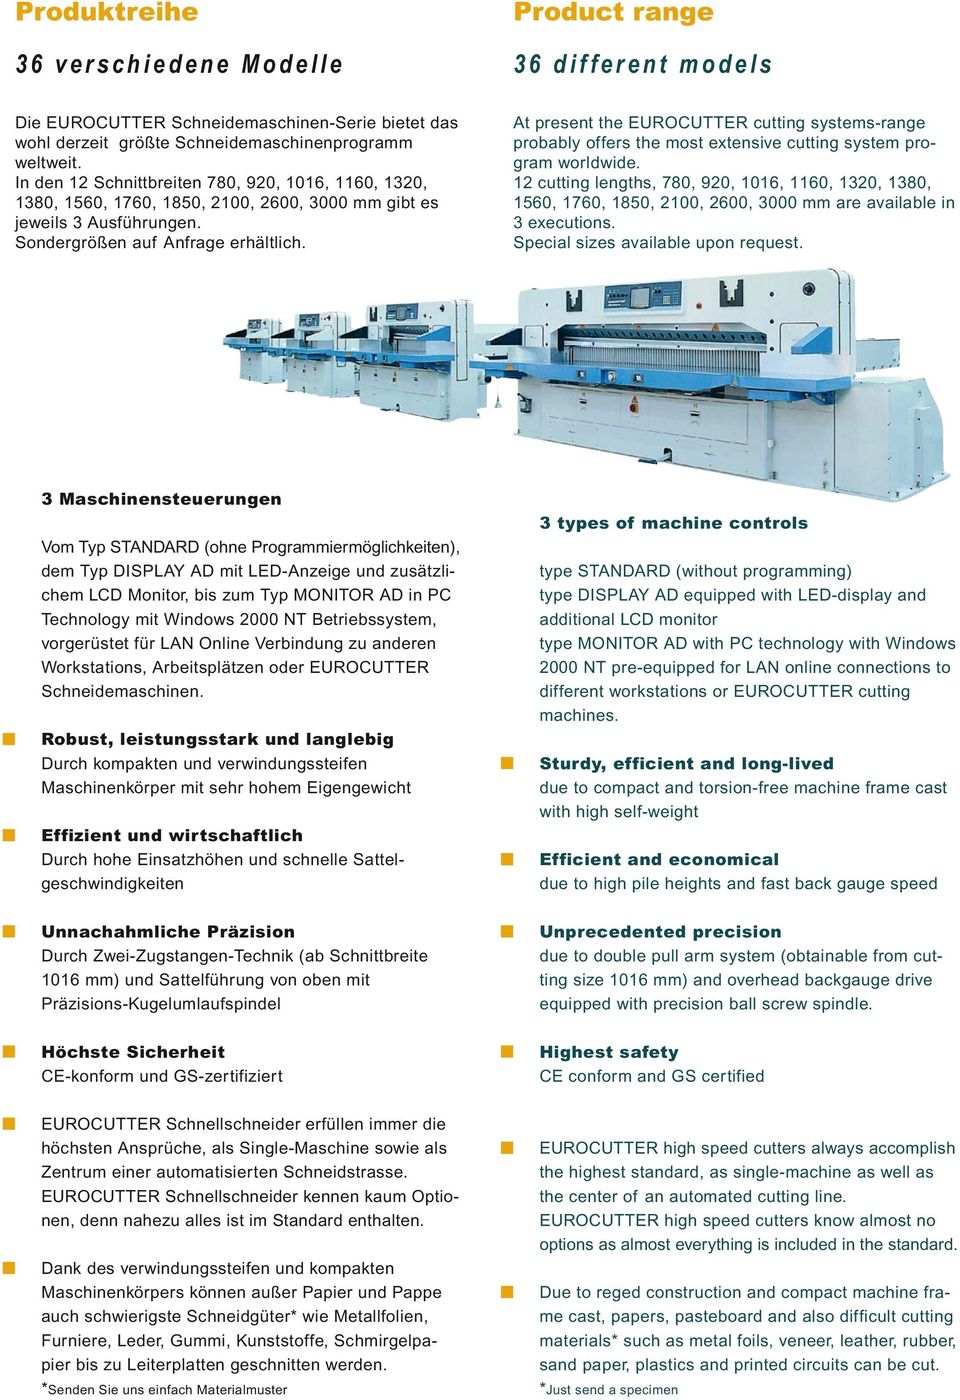 At present the EUROCUTTER cutting systems-range probably offers the most extensive cutting system program worldwide.